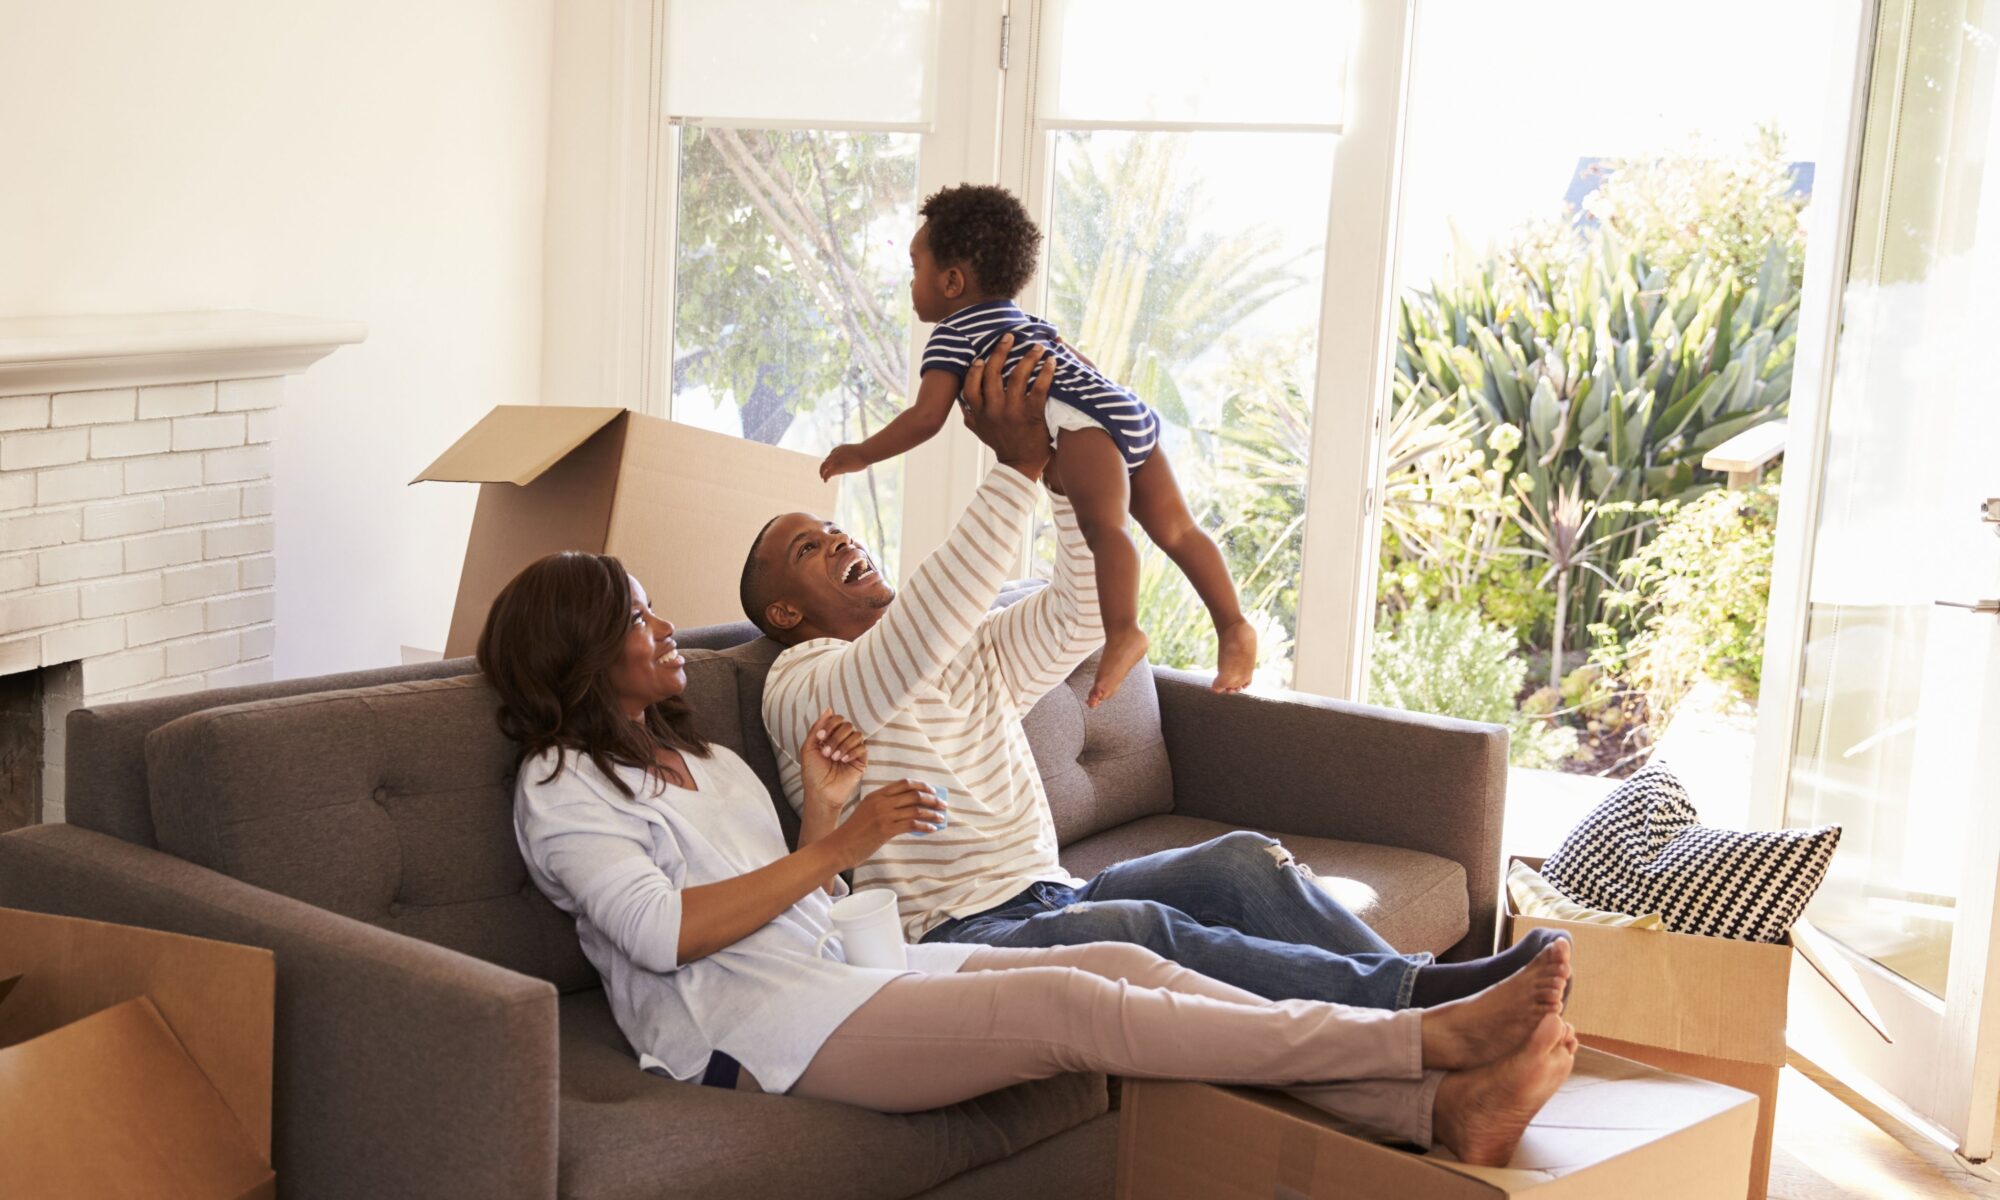 Parents Take A Break On Sofa With Son On Moving Day